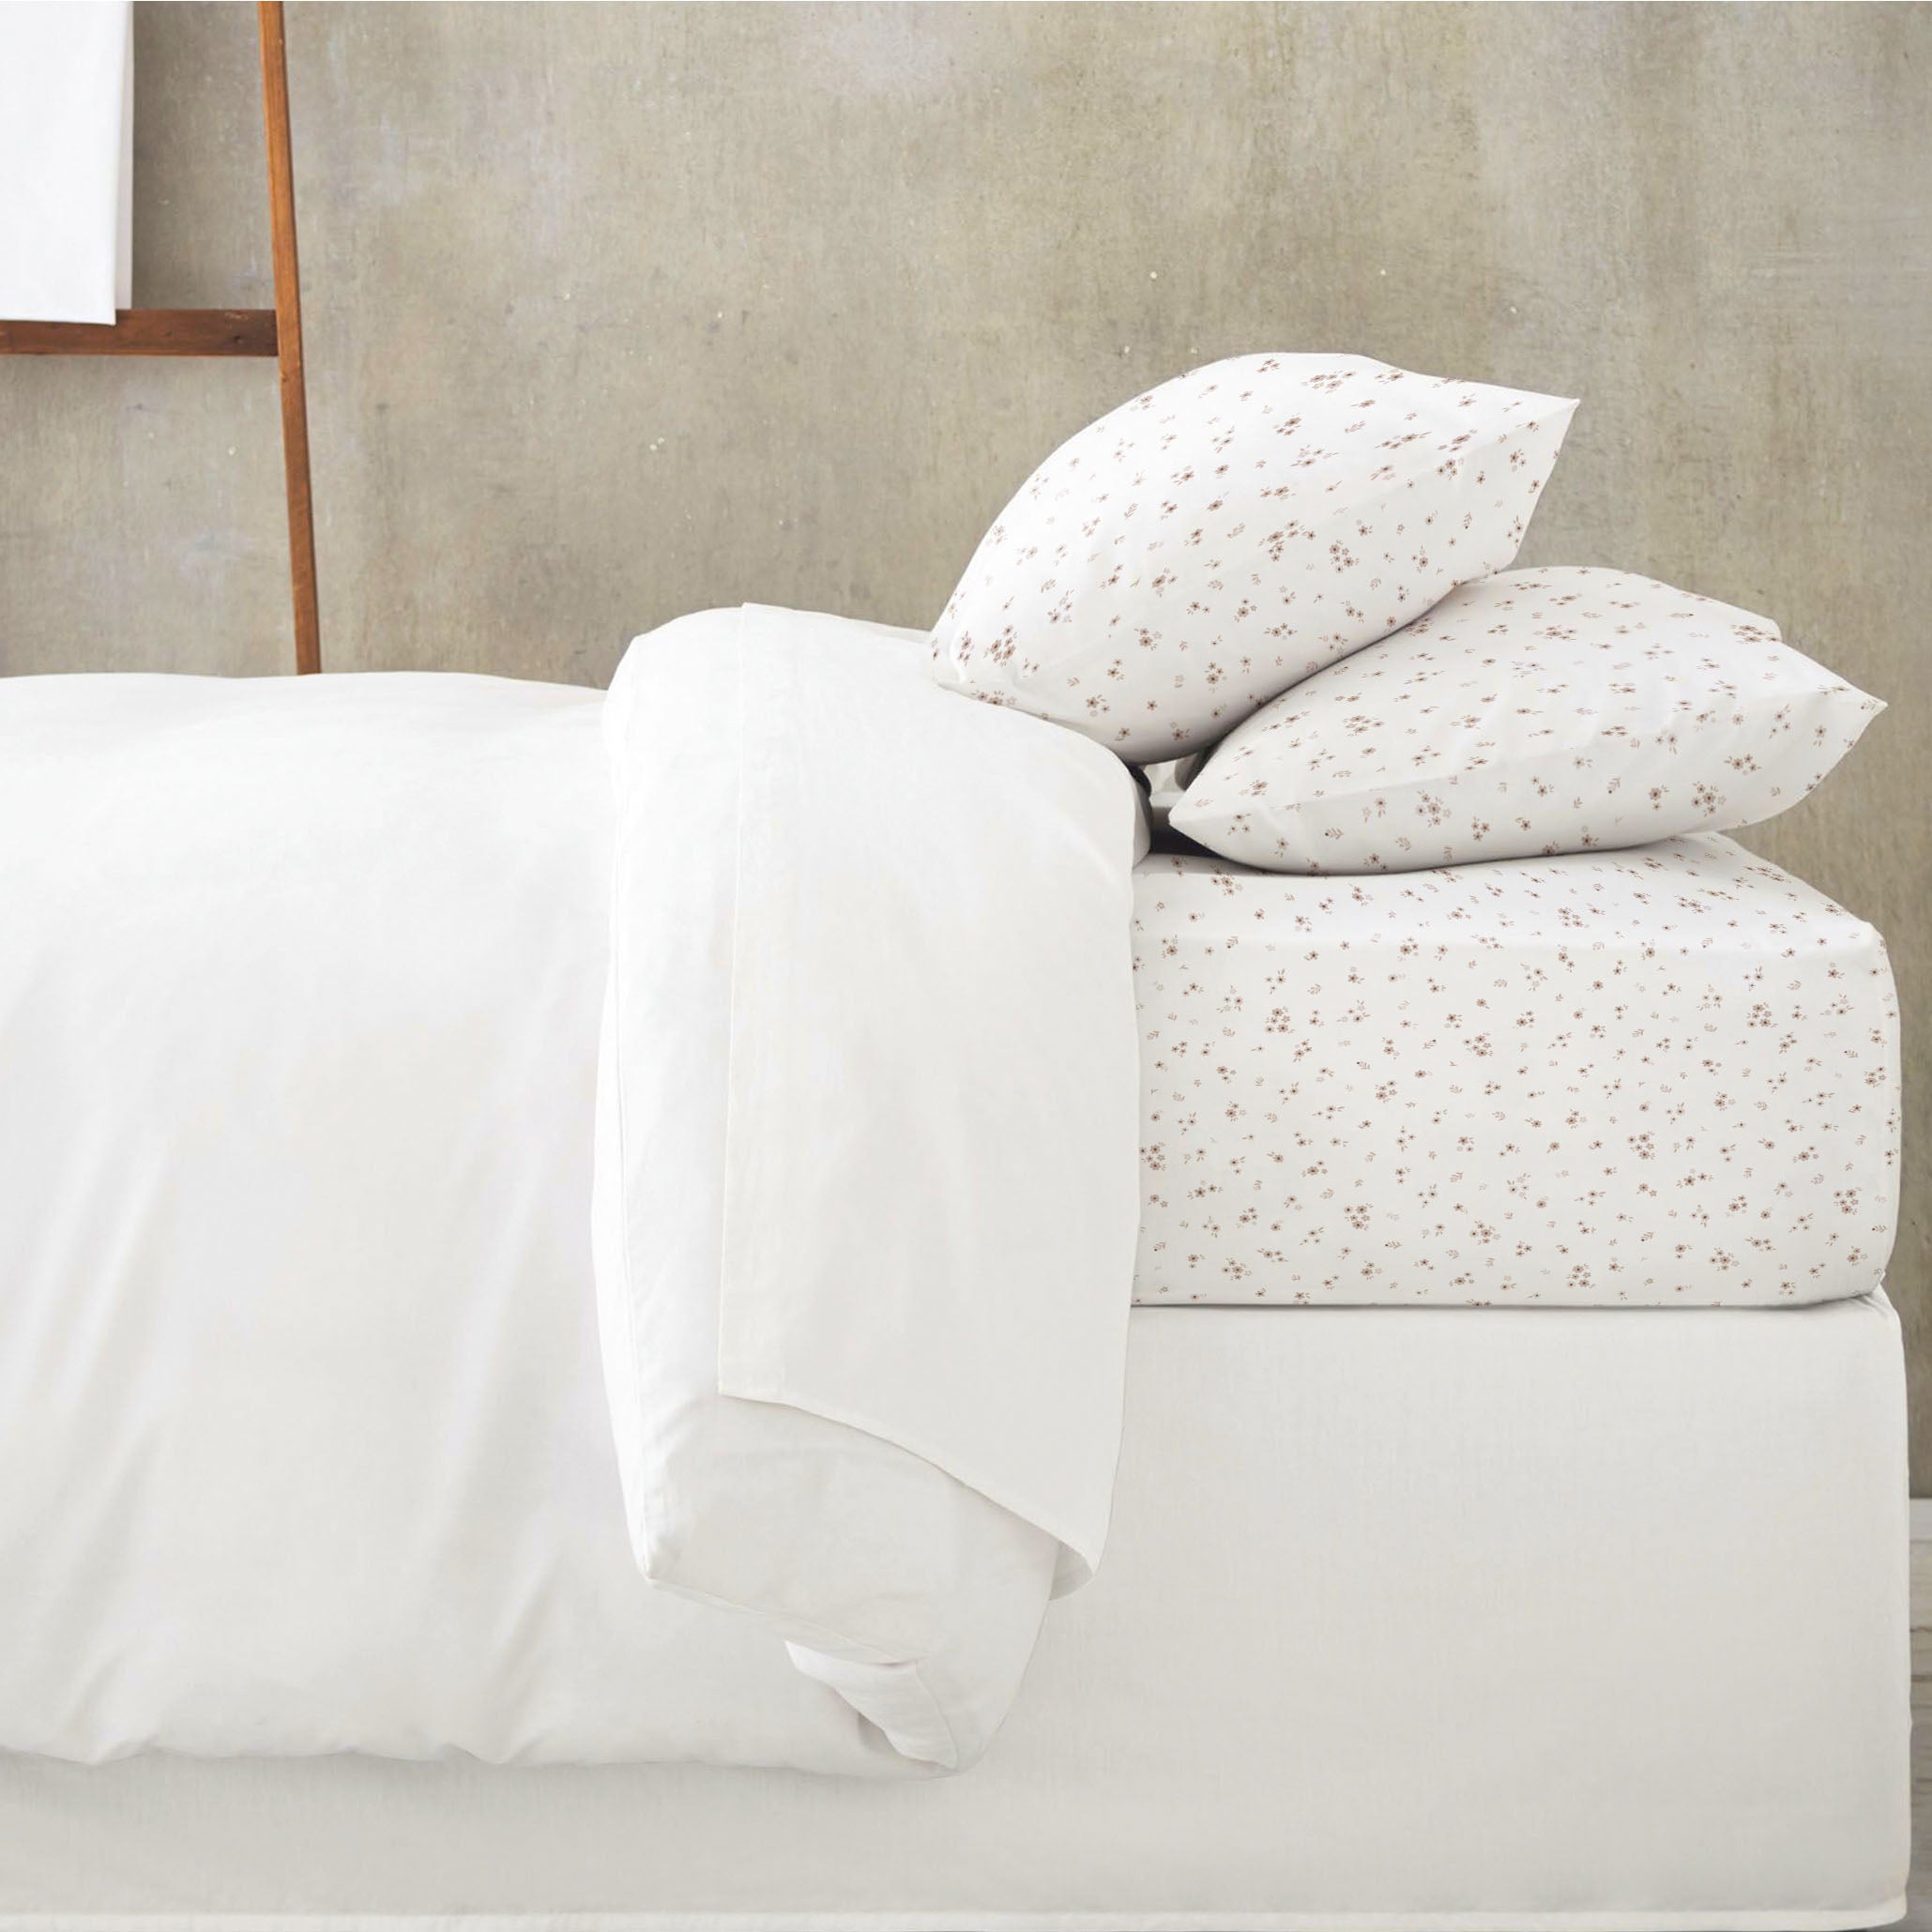 A neatly made bed with a white duvet and two pillows, one with a white cover and another with a tiny floral print, set against a grey wall.